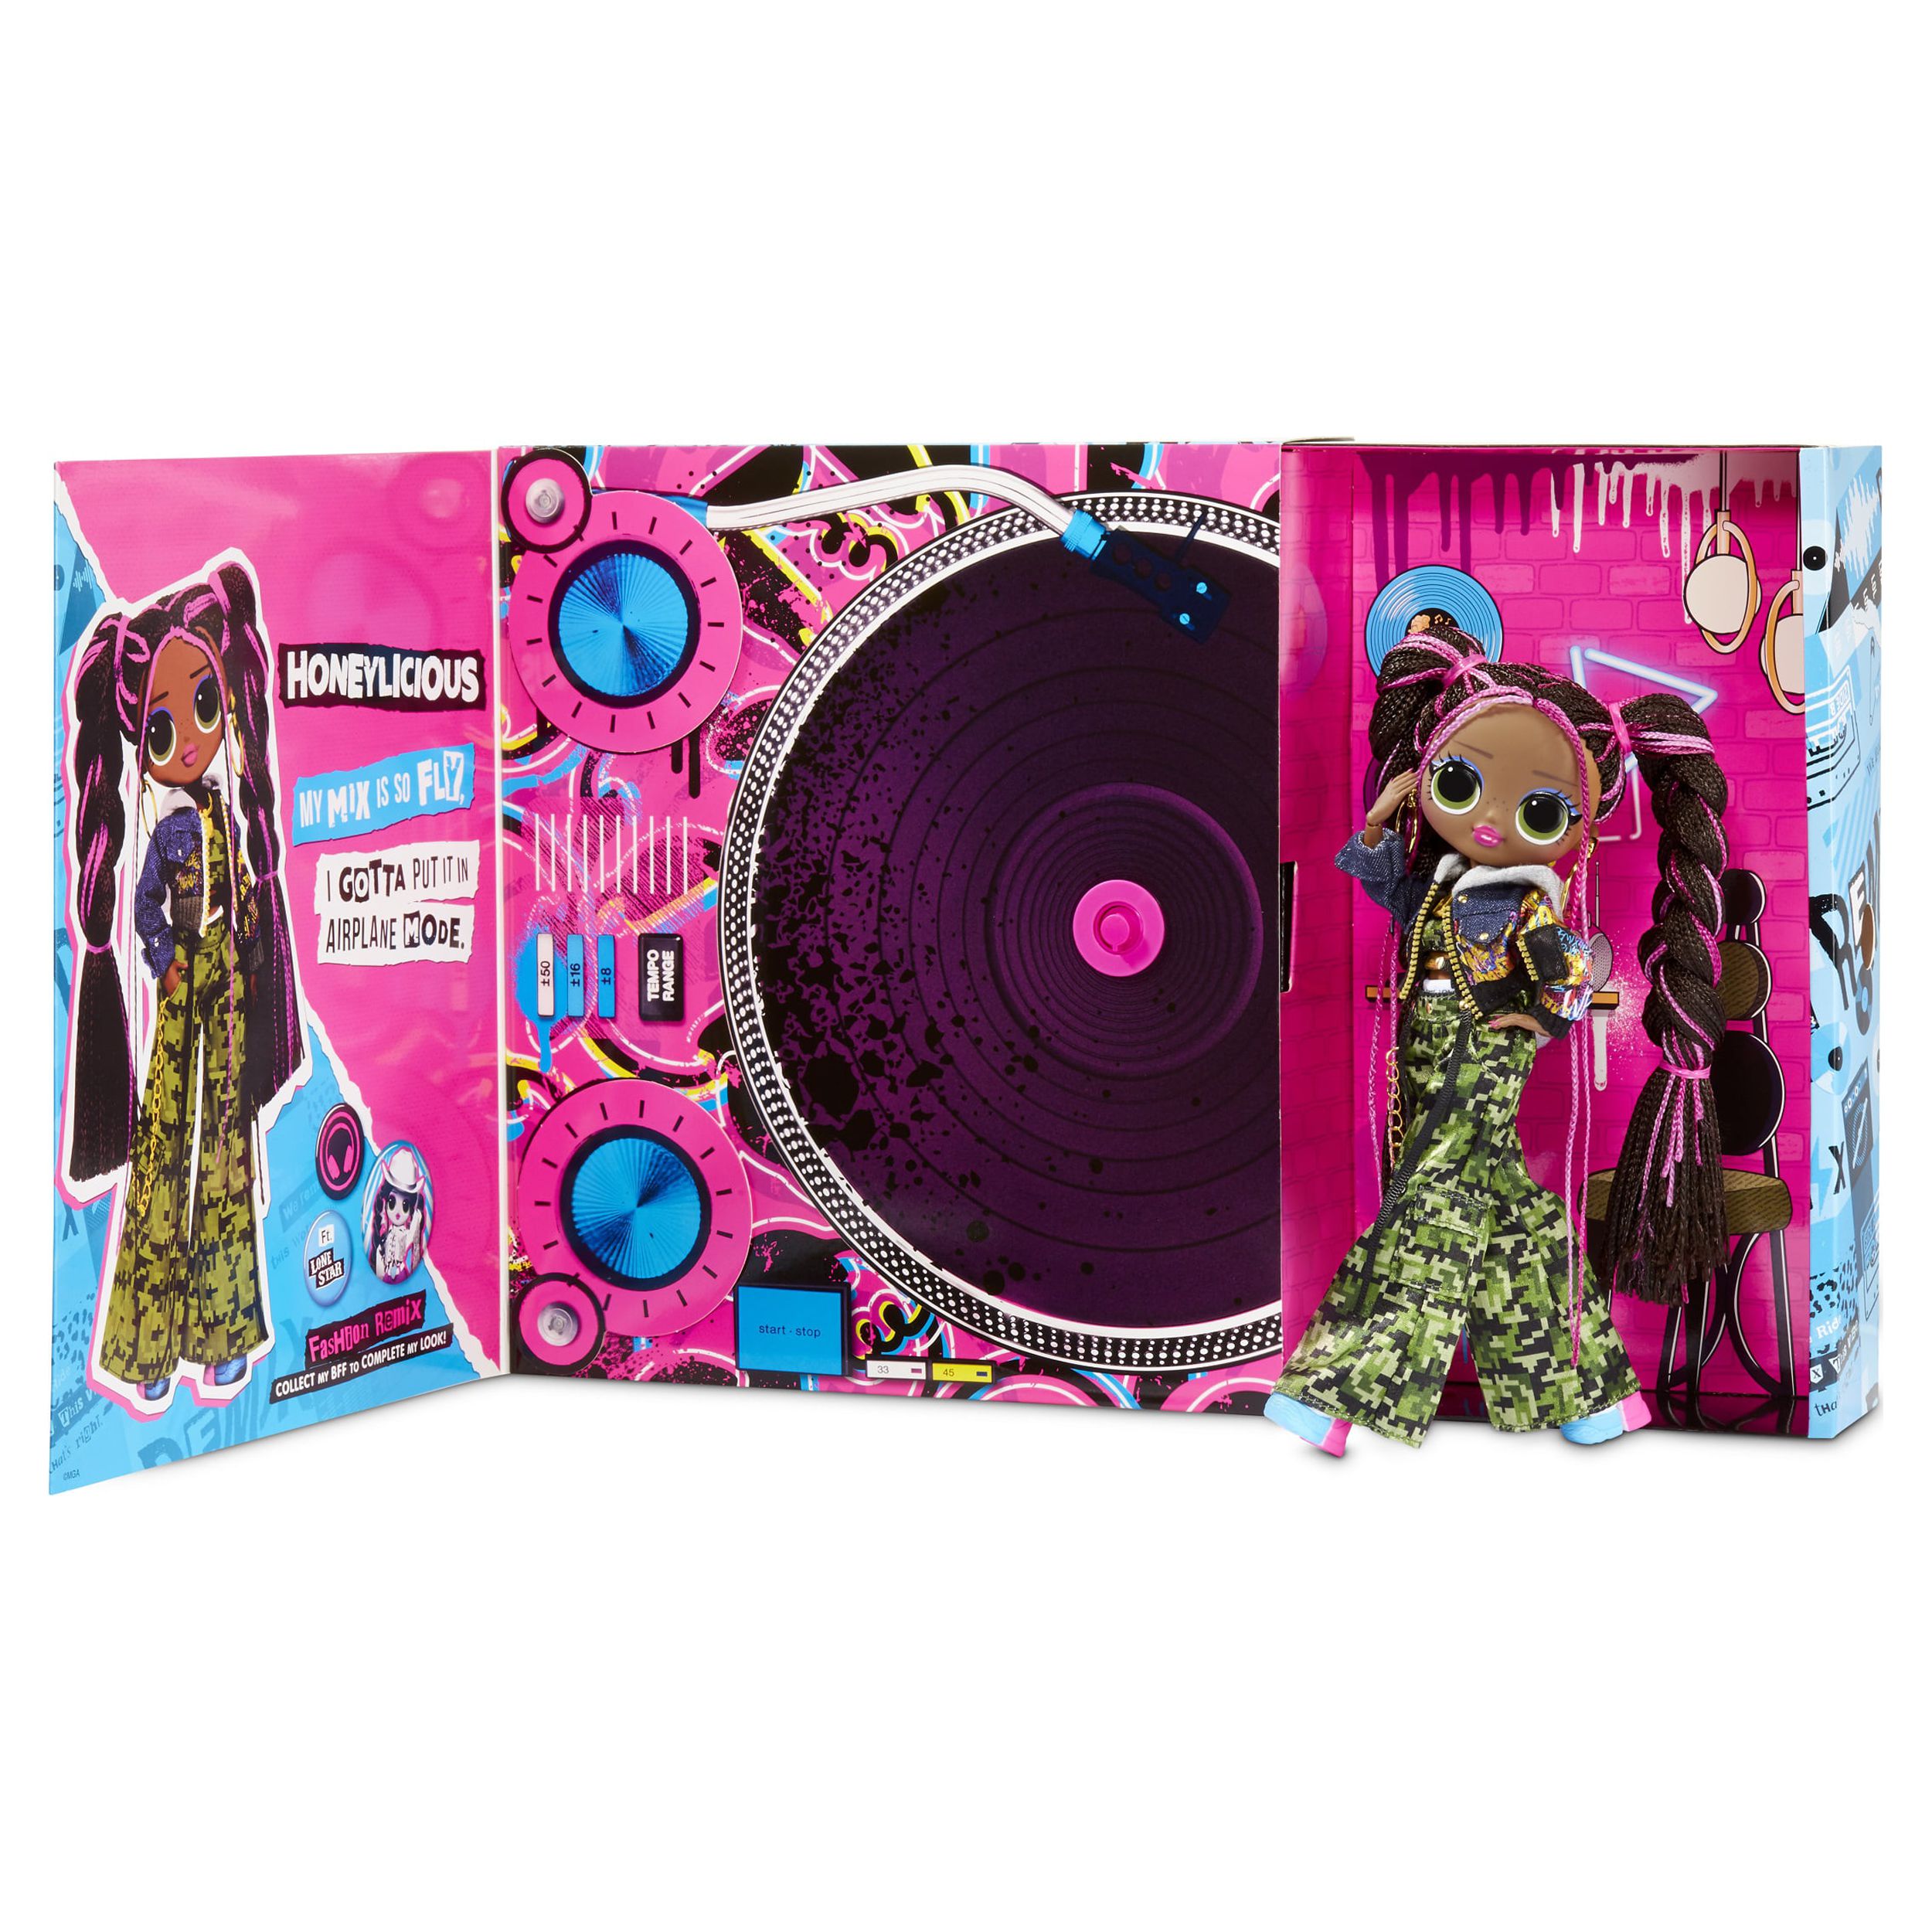 LOL Surprise OMG Remix Honeylicious Fashion Doll - 25 Surprises With Music Age 5+ - image 4 of 9